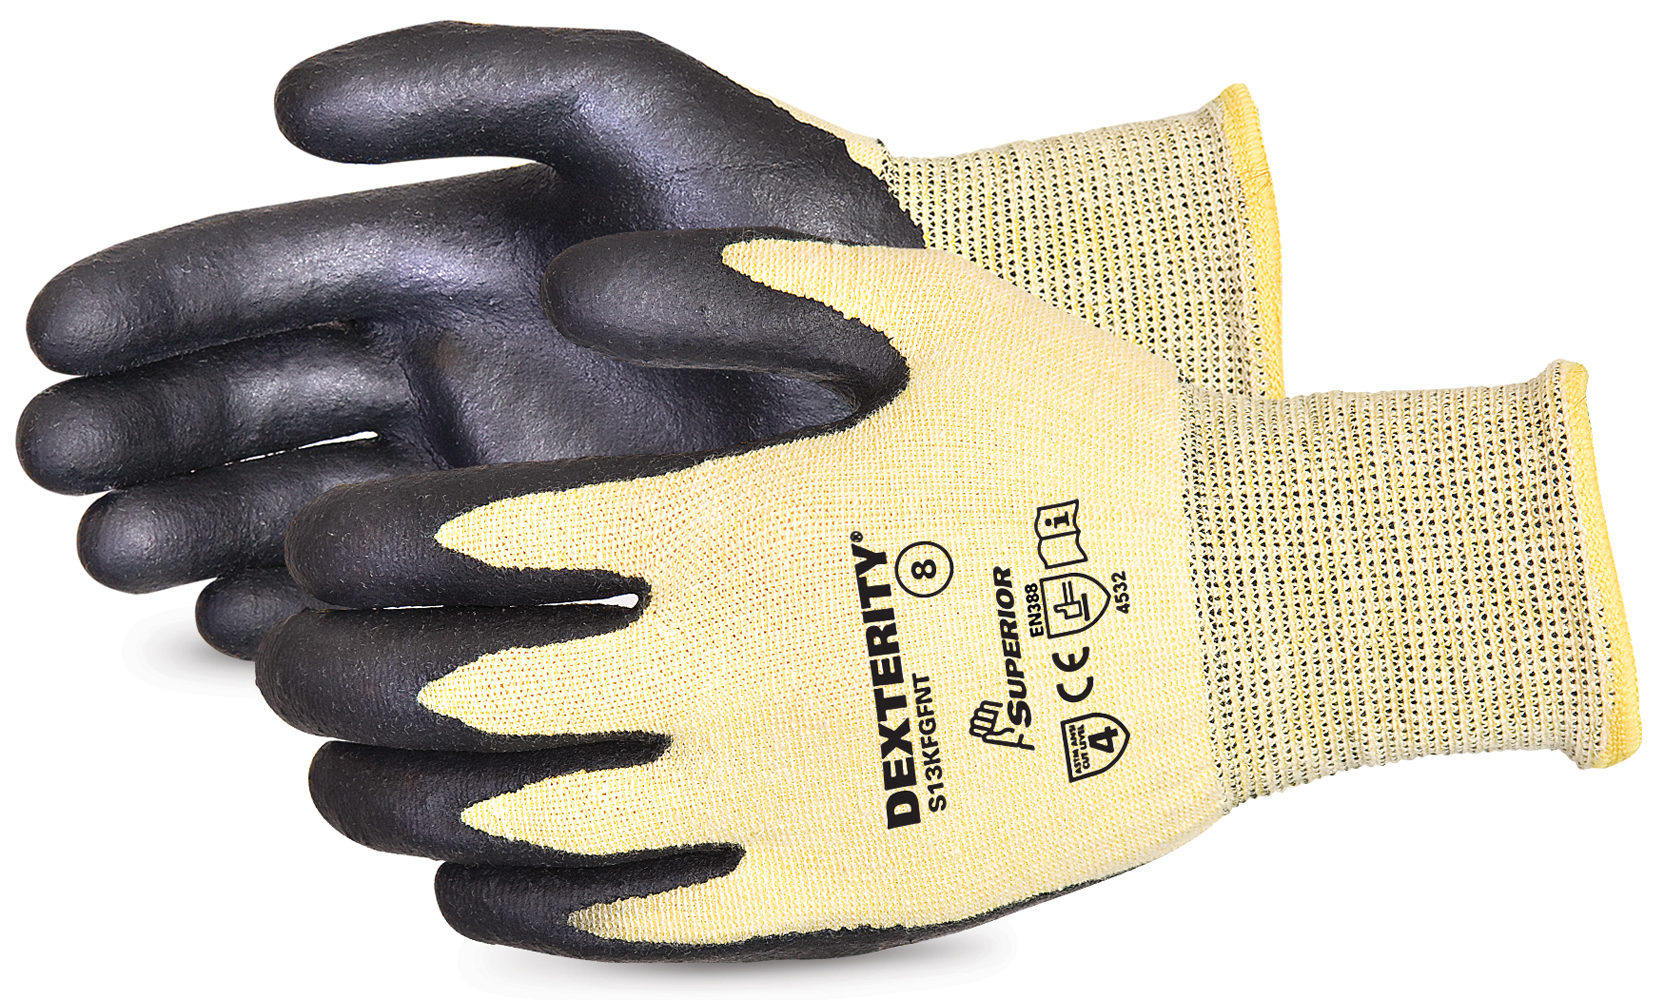 Dexterity Nitrile Palm-Coated Cut-Resistant String-Knit Glove